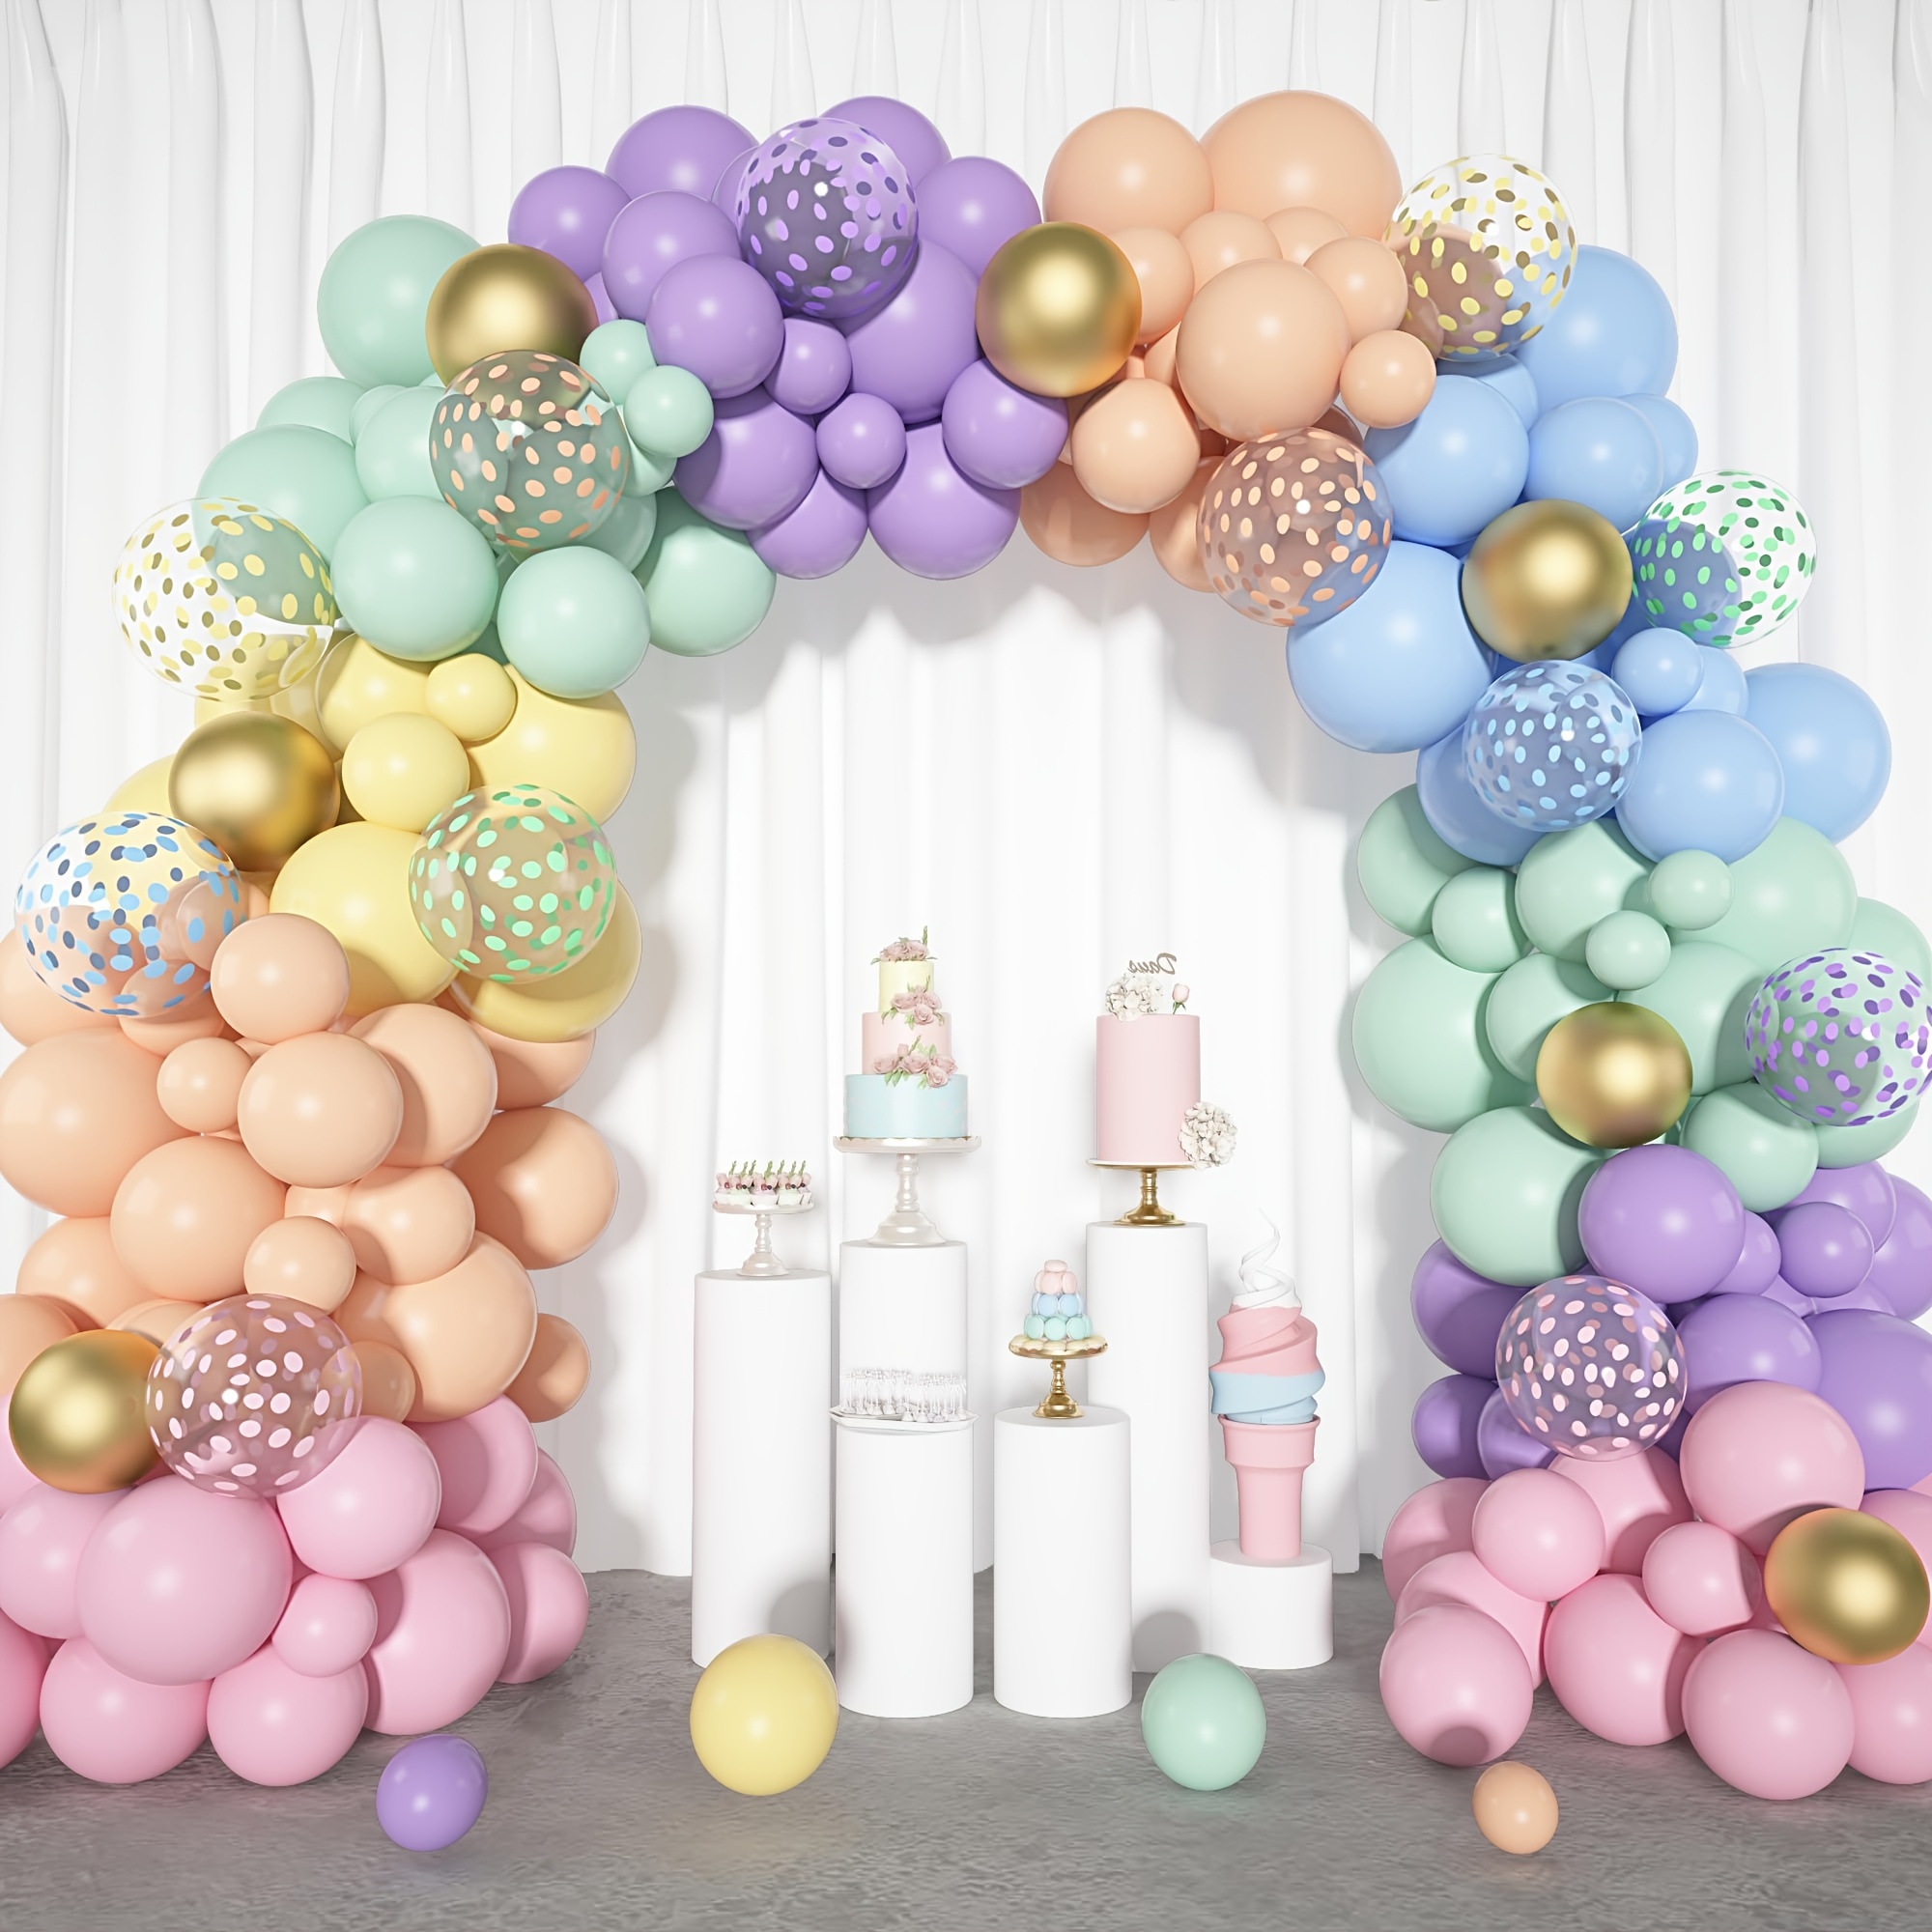 

164pcs Pastel Balloon Garland Set, Rainbow Easter Balloon Arch, Colorful Golden Confetti Balloons For Pastel Easter Baby Shower Wedding Ice Cream Mermaid Party Decoration Supplies